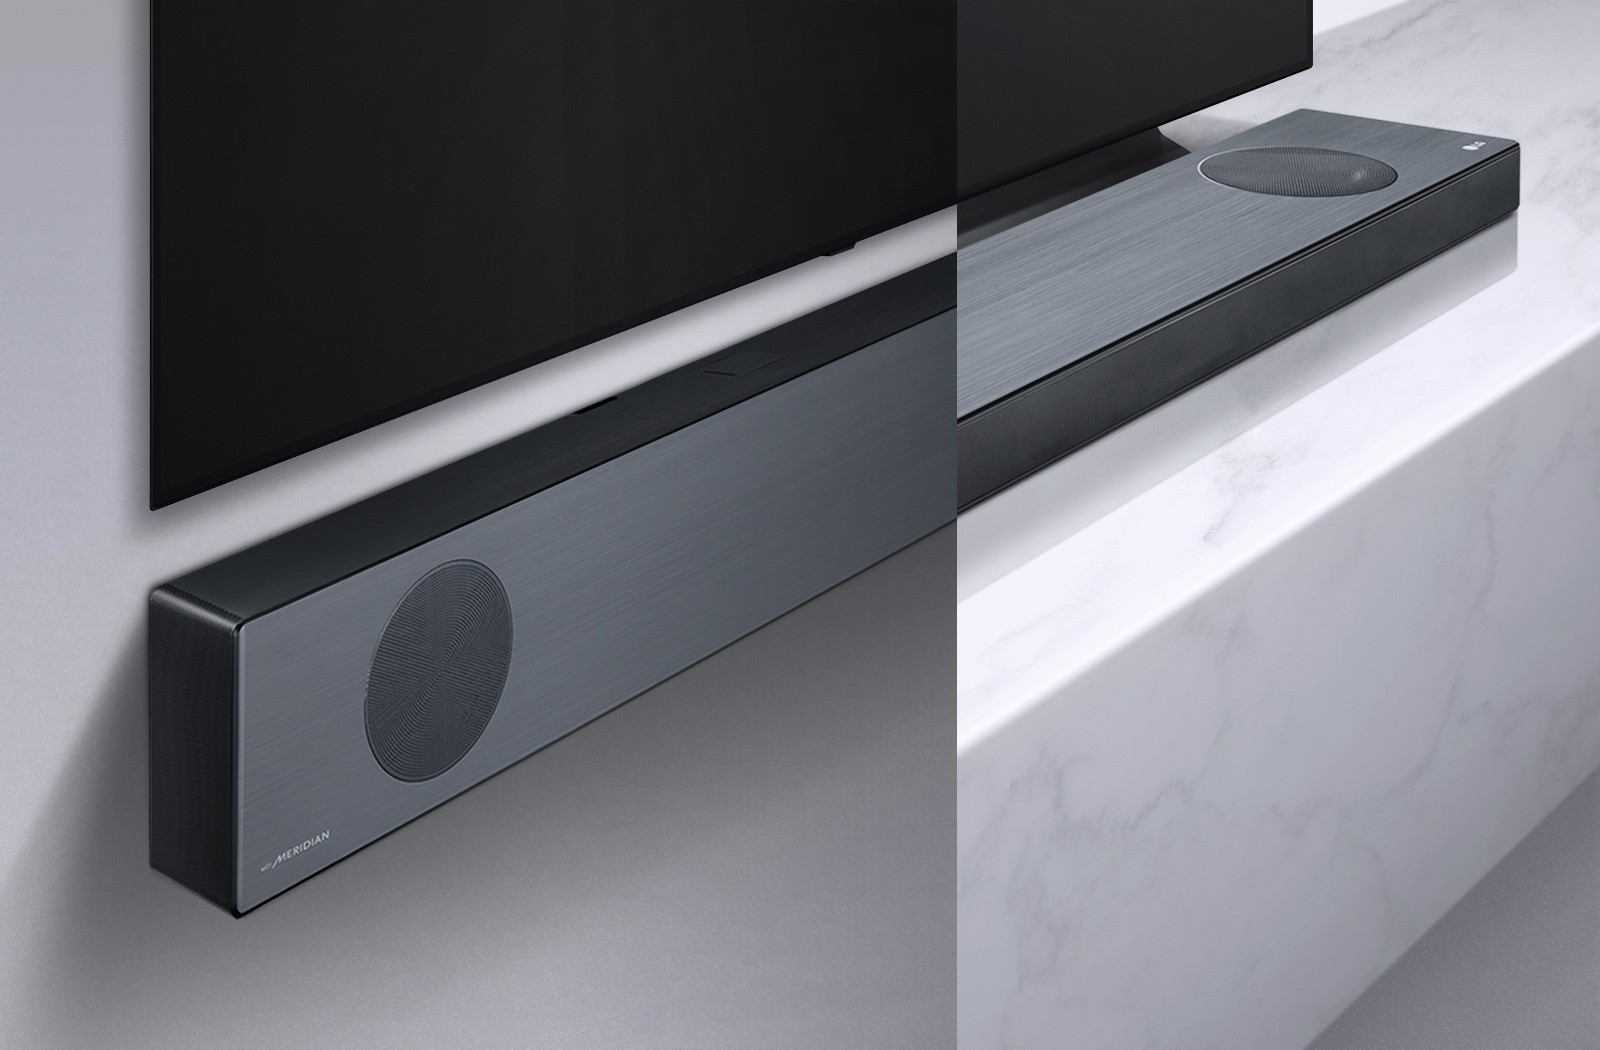 LG's tech-packed new soundbars will be on show at CES